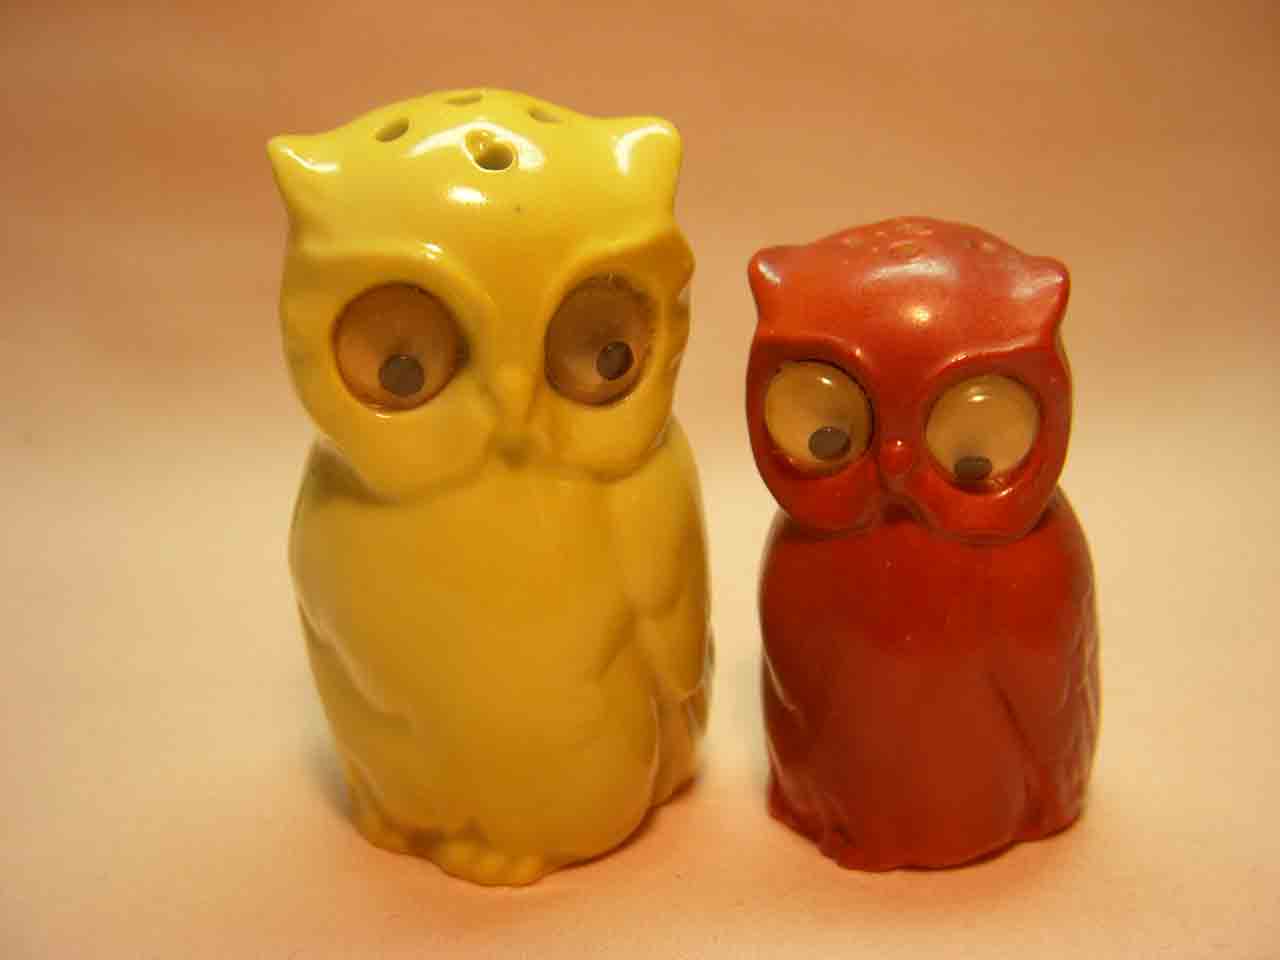 Germany google-eyed animal salt and pepper shakers - owls